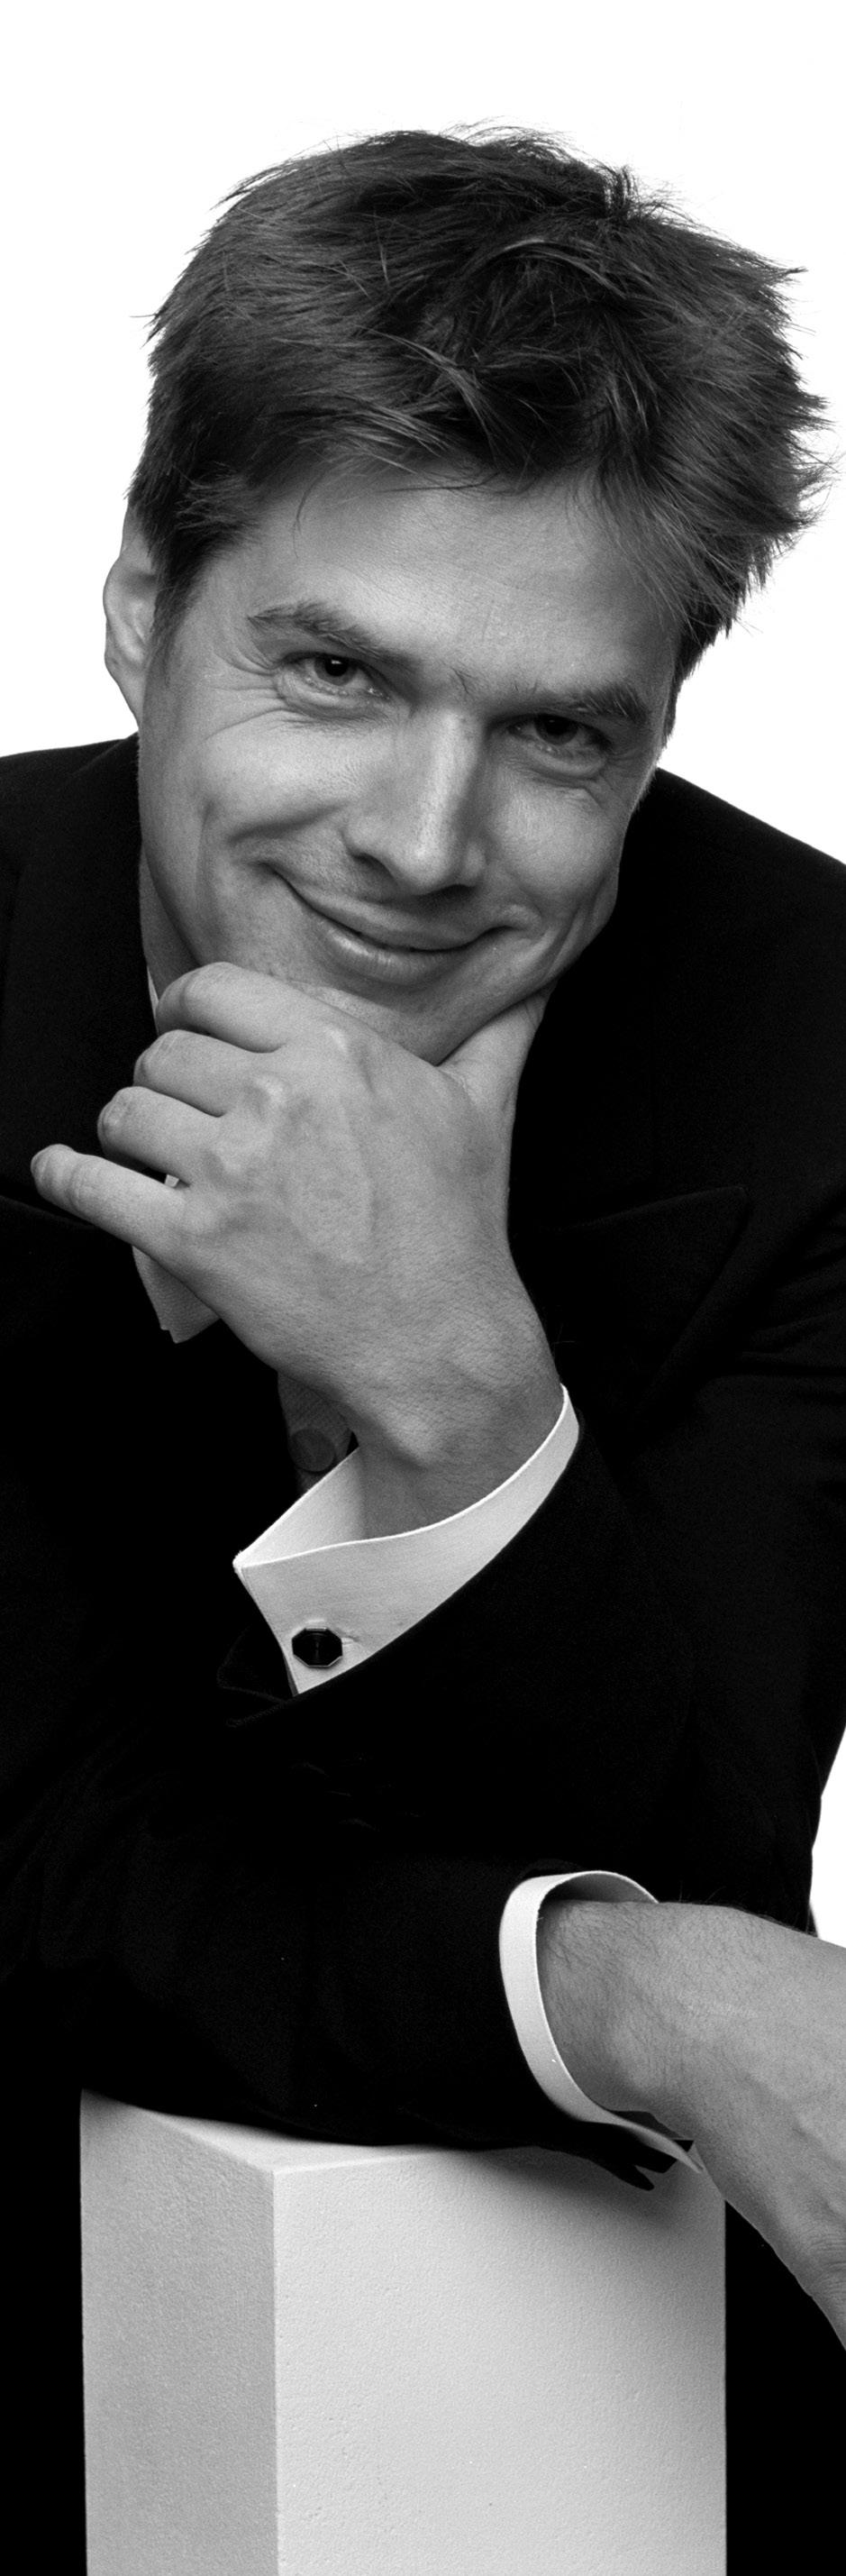 CHRISTOPH meet the guest conductor C hristoph König is a conductor of deep intelligence and musicality.